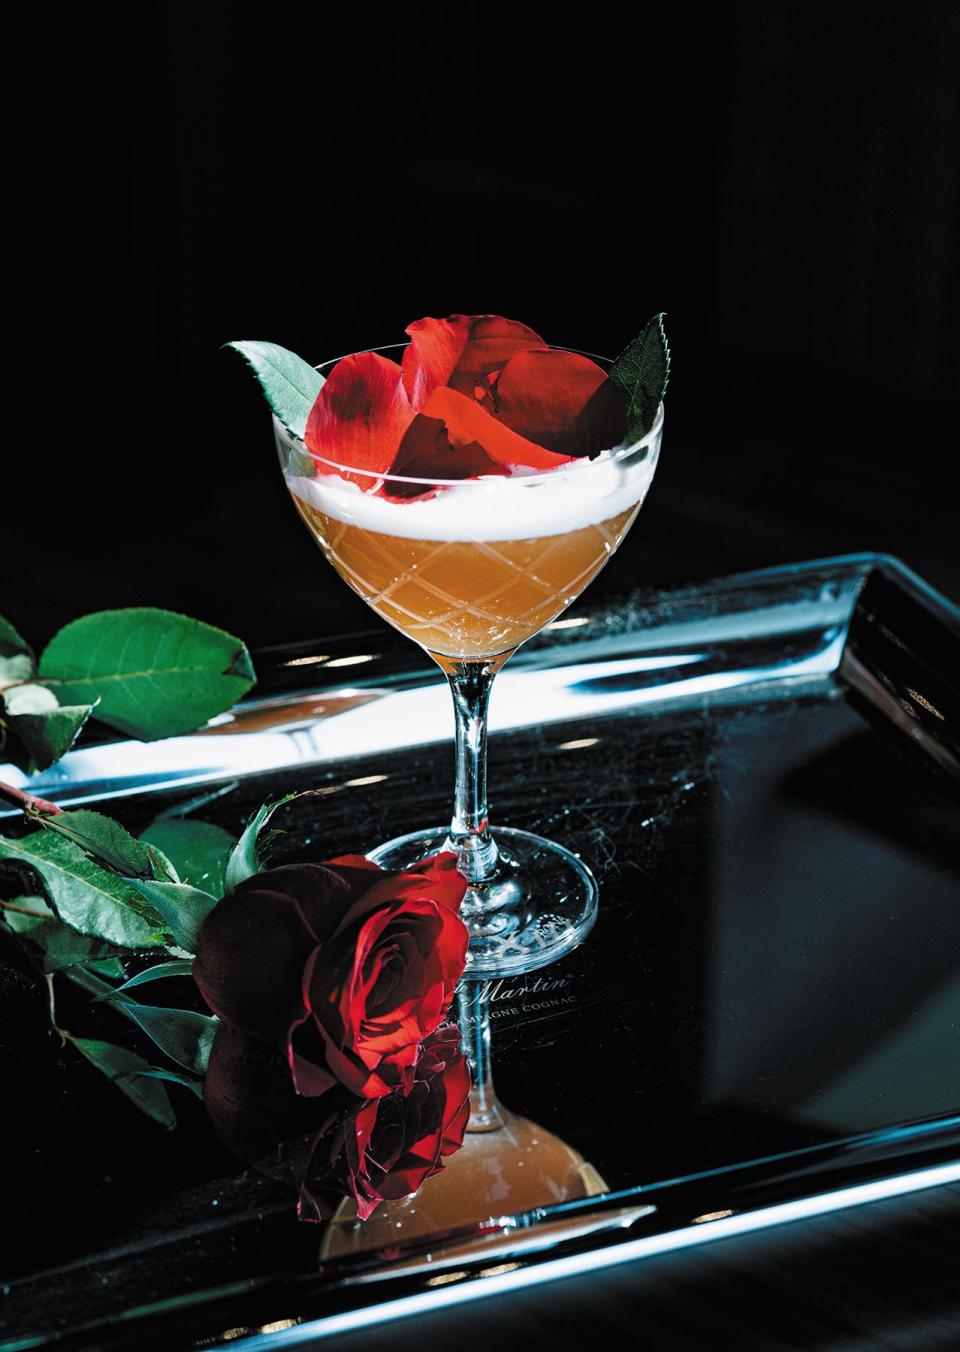 Indulge with a French Kiss cocktail at 1000 NORTH in Jupiter this Valentine's Day.